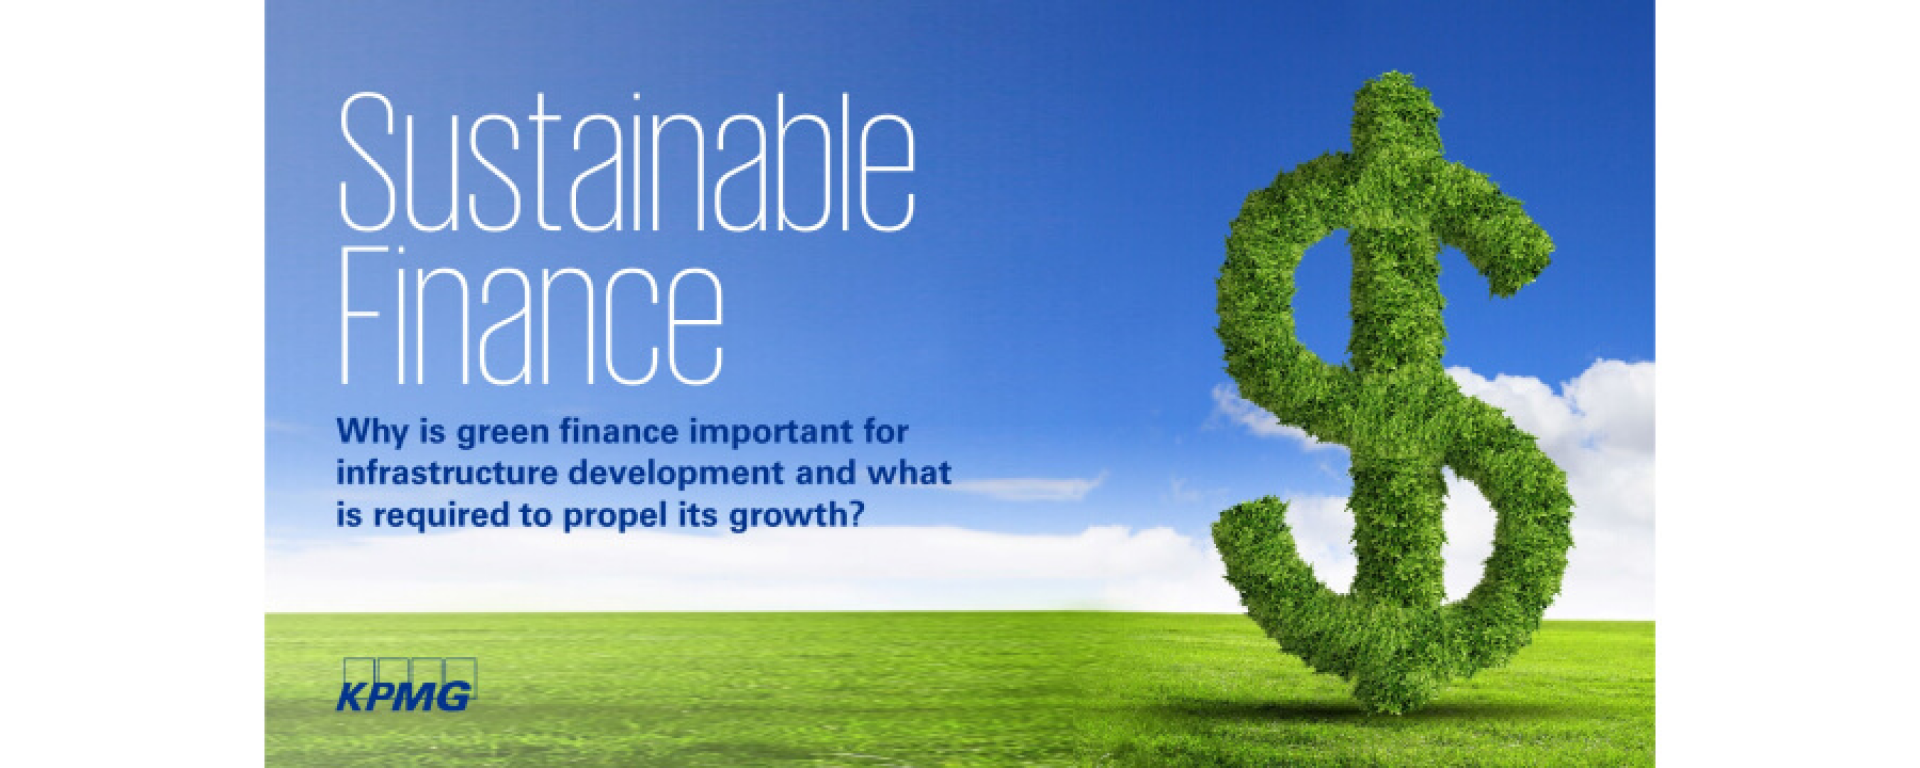 Sustainable financing 